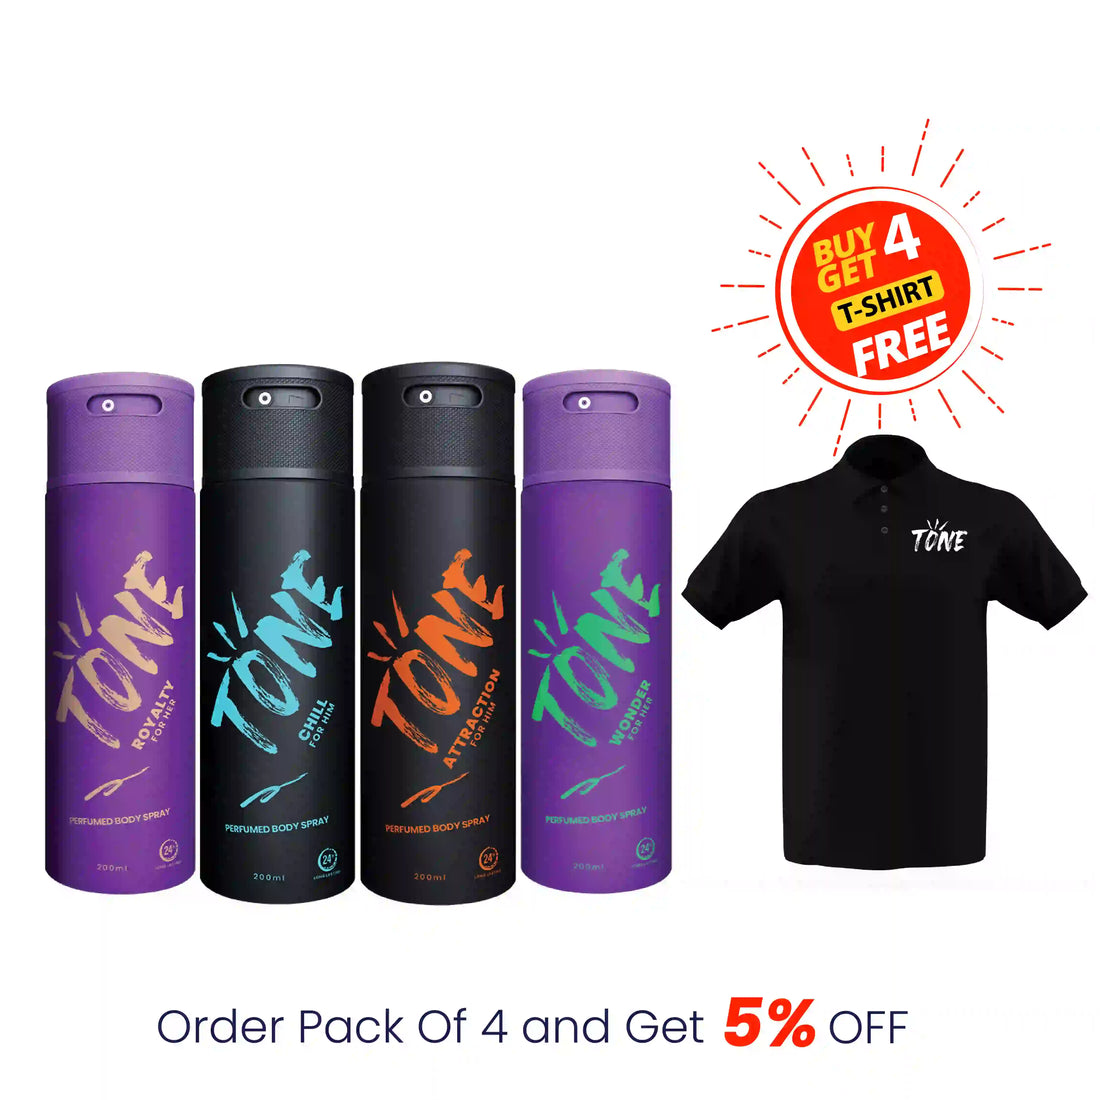 Pack of 4 (Royalty, Chill, Attraction and Wonder) with free T-Shirt